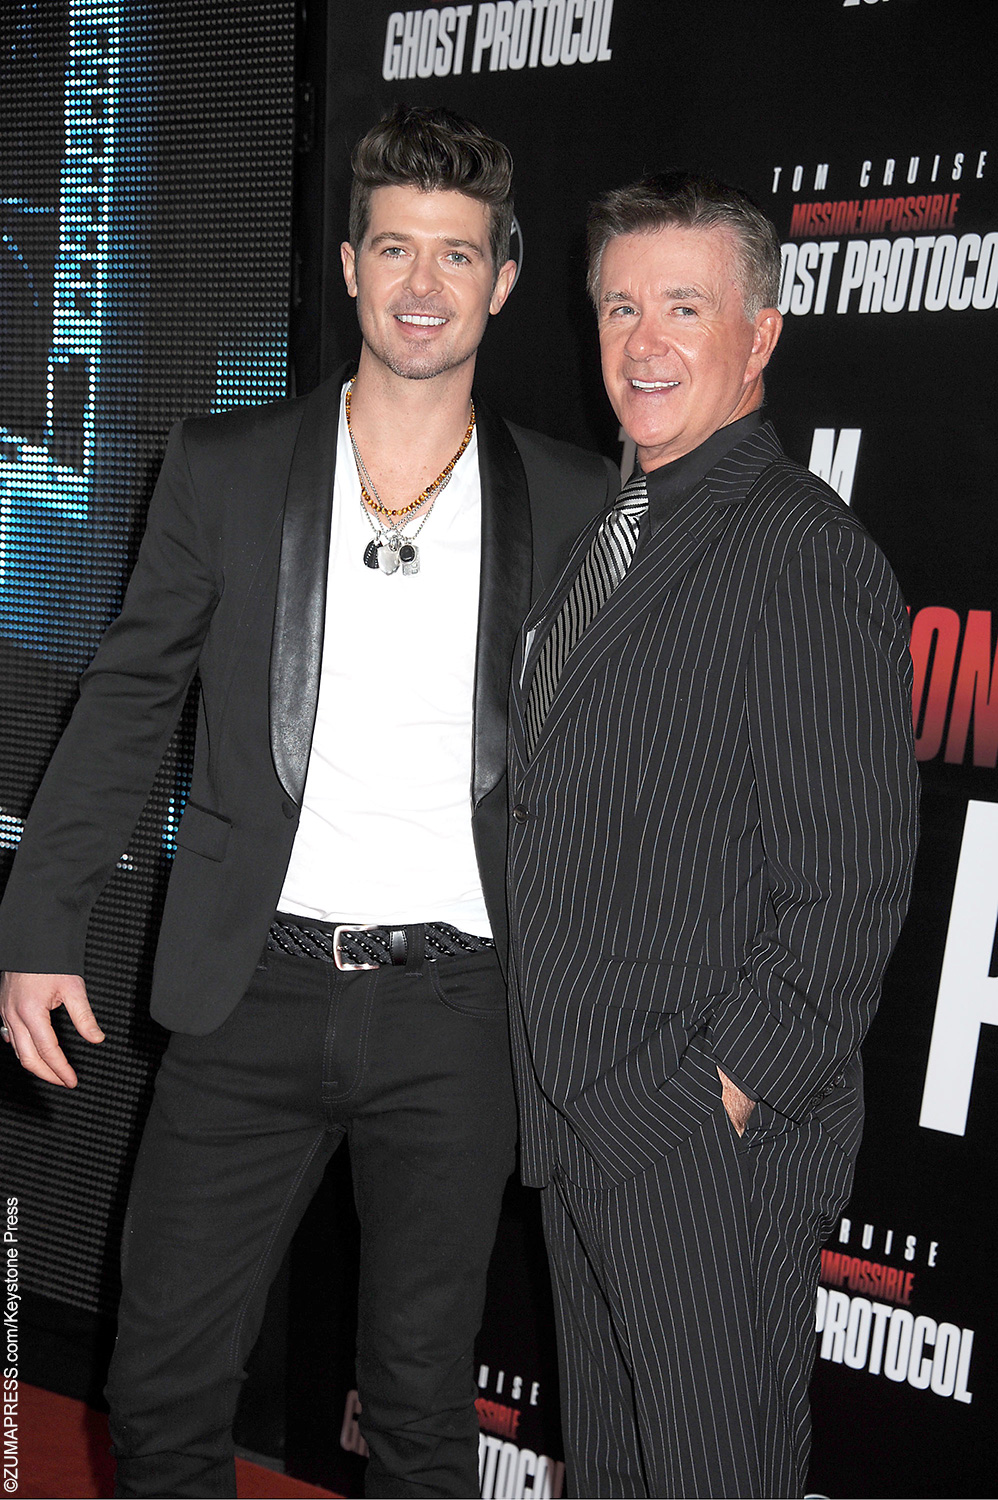 Want to know what Robin Thicke, whose mother is Gloria Loring, will look like in 30 years? Just take a look at his father. If Robin and Alan Thicke were the same age, we bet they would look like twins.